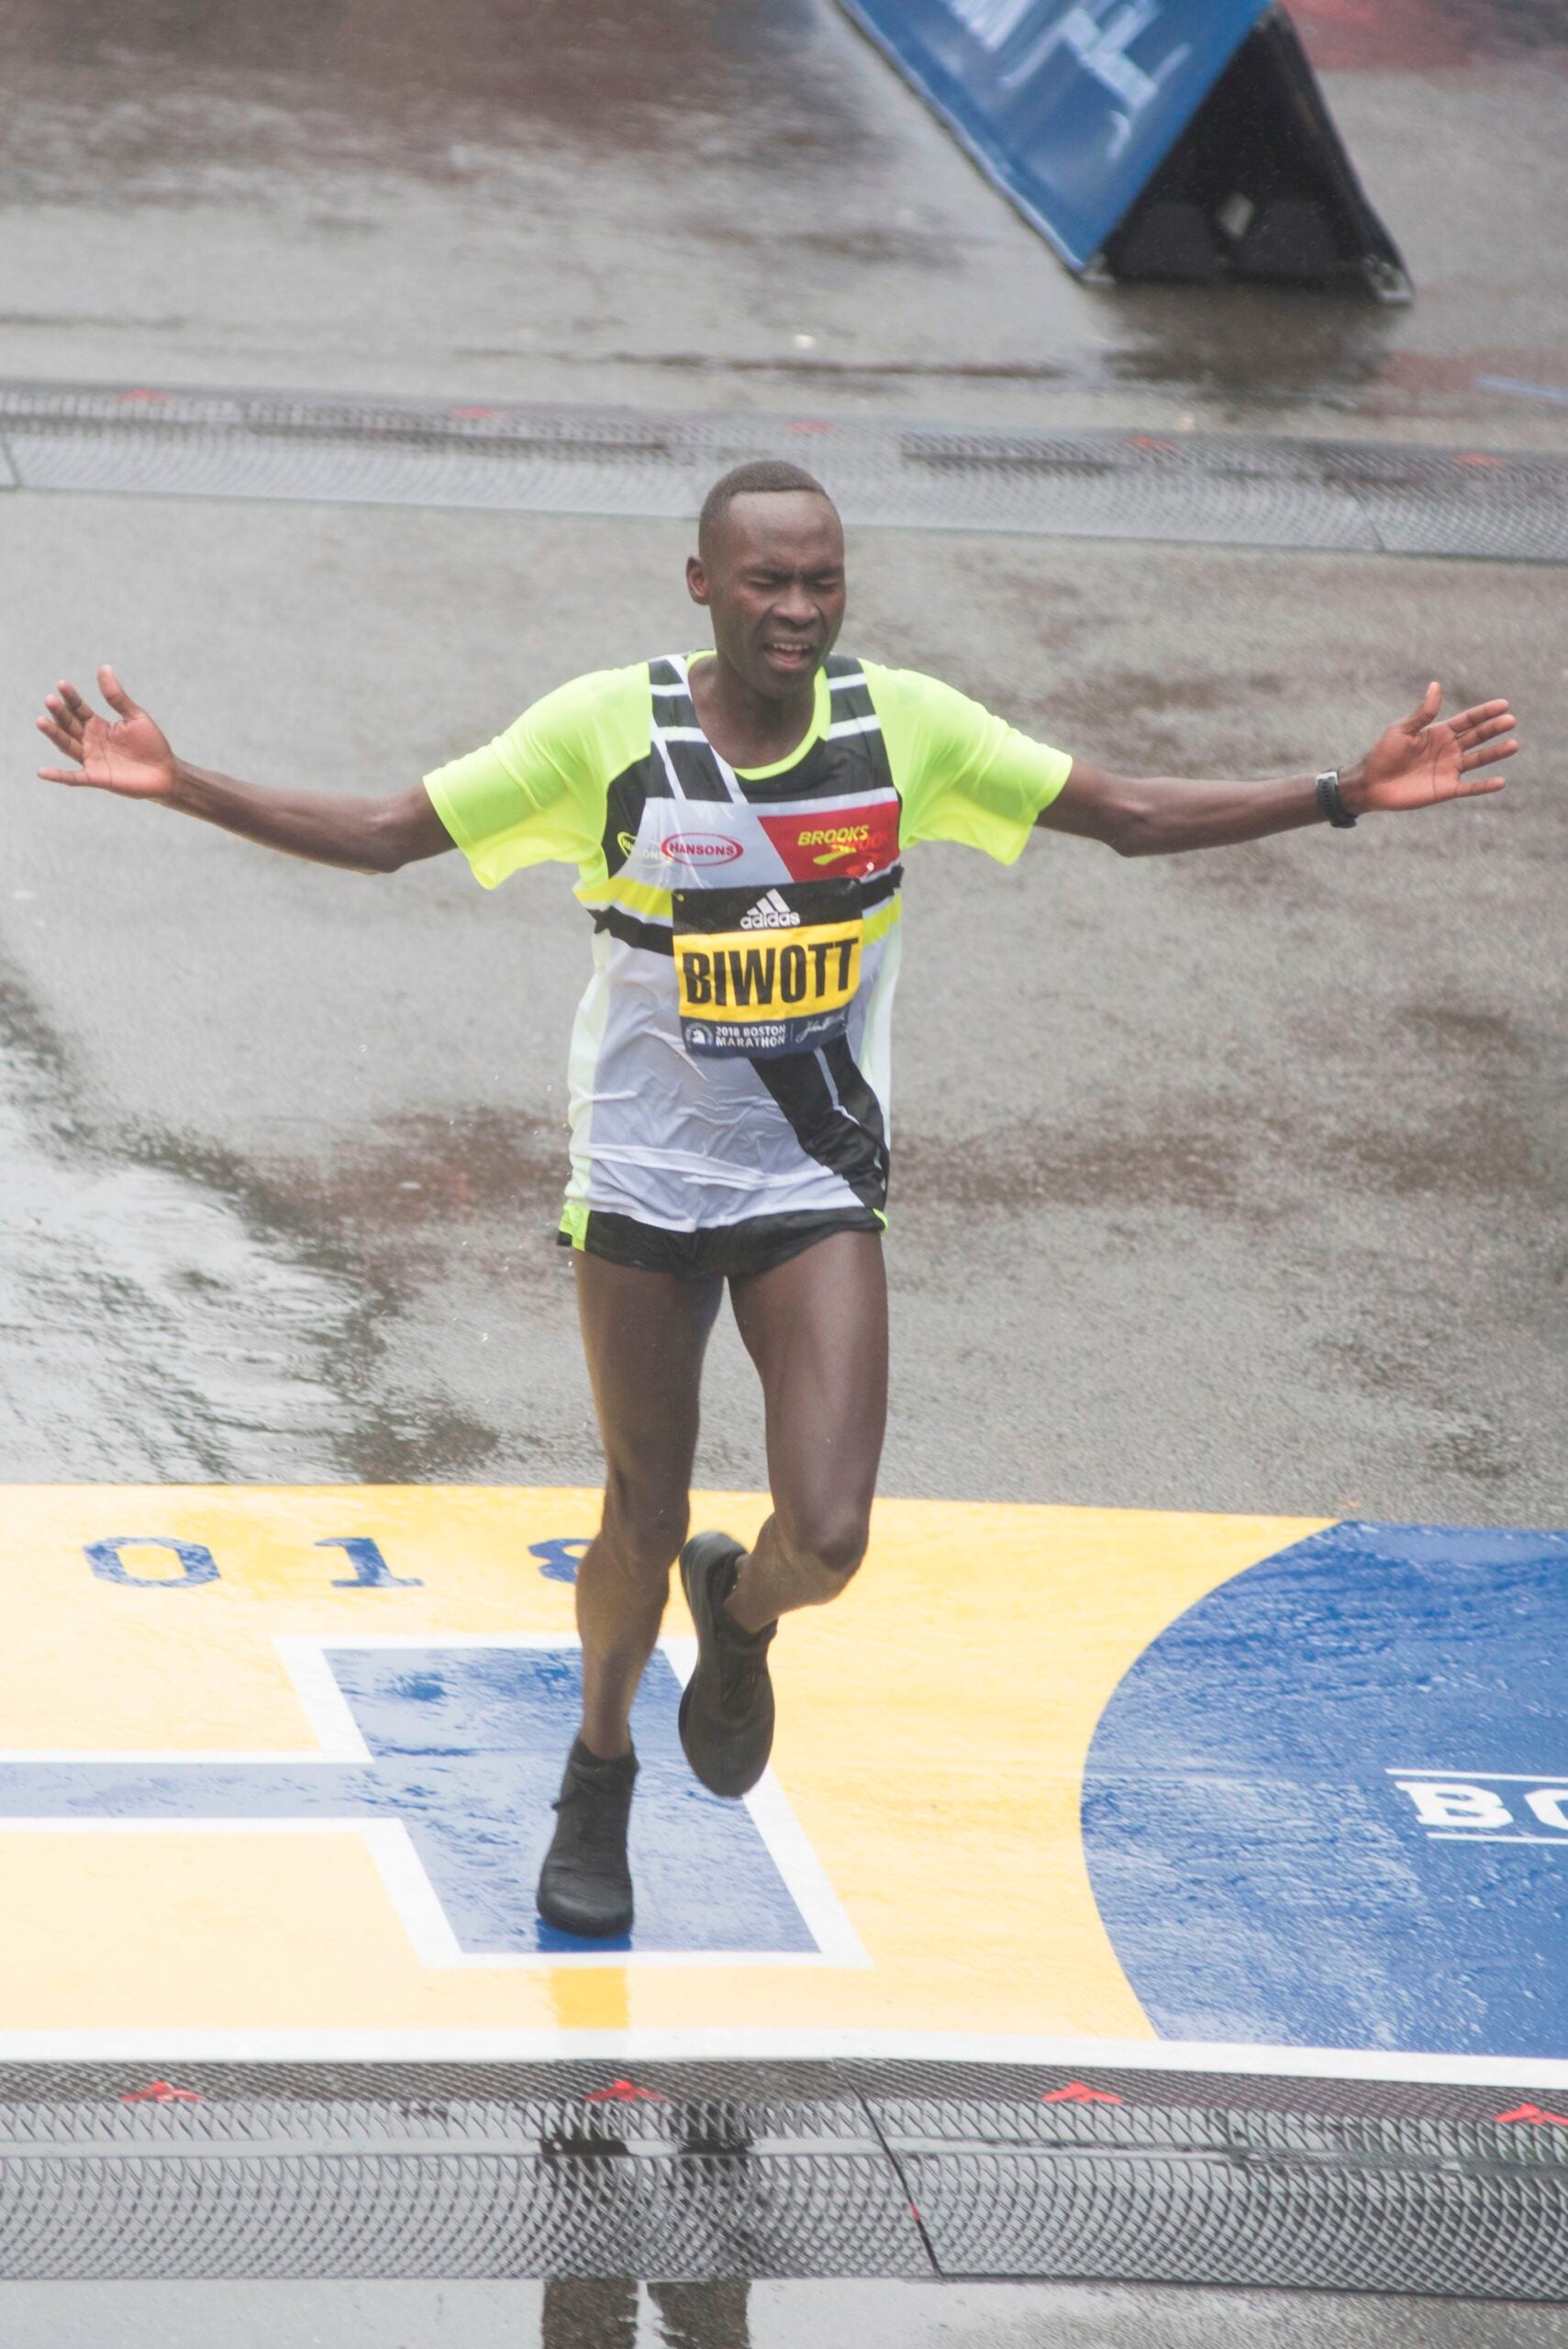 Shadrack Biwott of the United States crosses the finish line in third place for the 2018 and 122nd Boston Marathon for Elite Men's race with a time of 2:18:35 on April 16, 2018 in Boston, Massachusetts. / AFP PHOTO / RYAN MCBRIDERYAN MCBRIDE/AFP/Getty Images